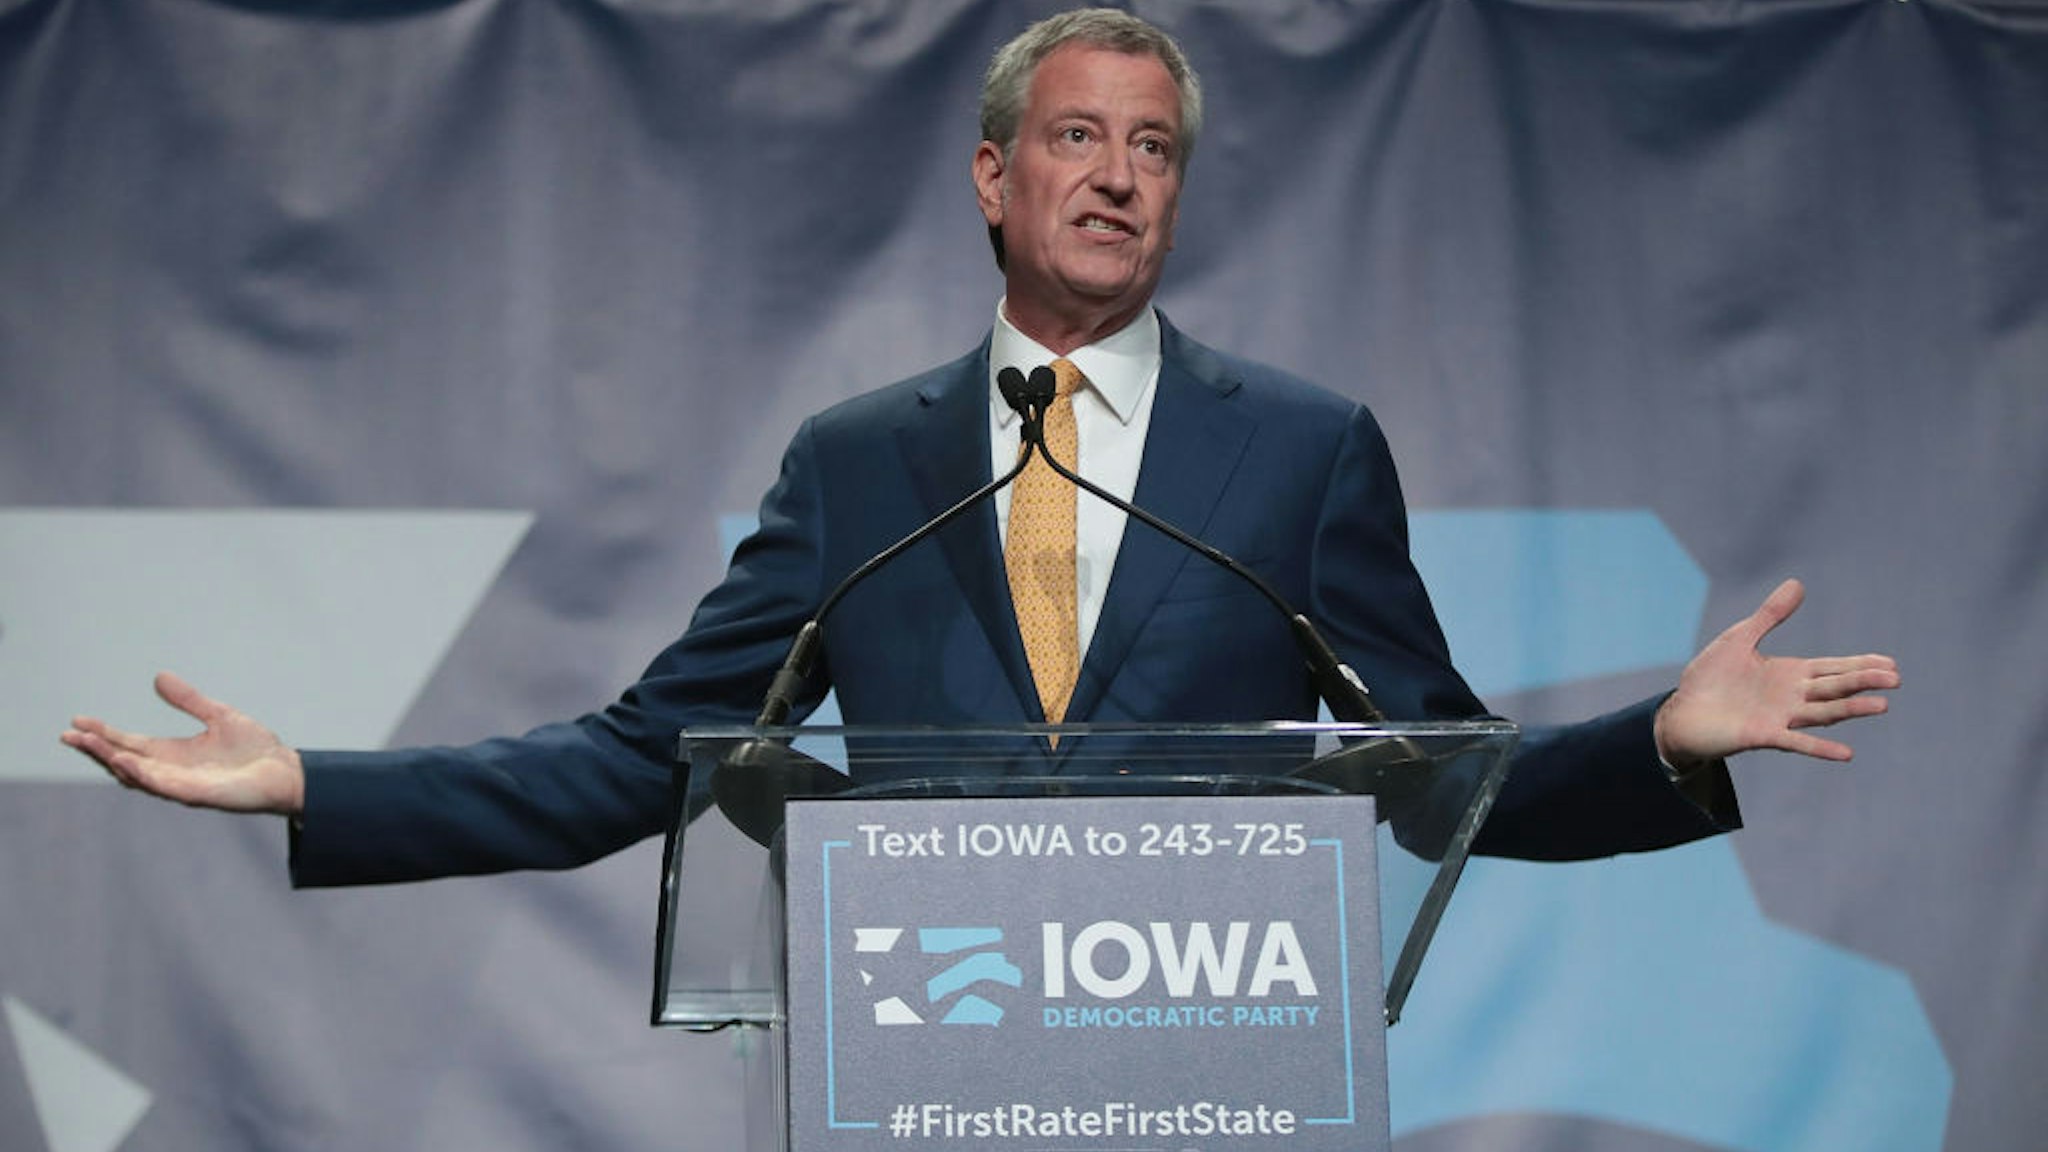 Democratic presidential candidate and New York City Mayor Bill De Blasio speaks at the Iowa Democratic Party's Hall of Fame Dinner on June 9, 2019 in Cedar Rapids, Iowa.